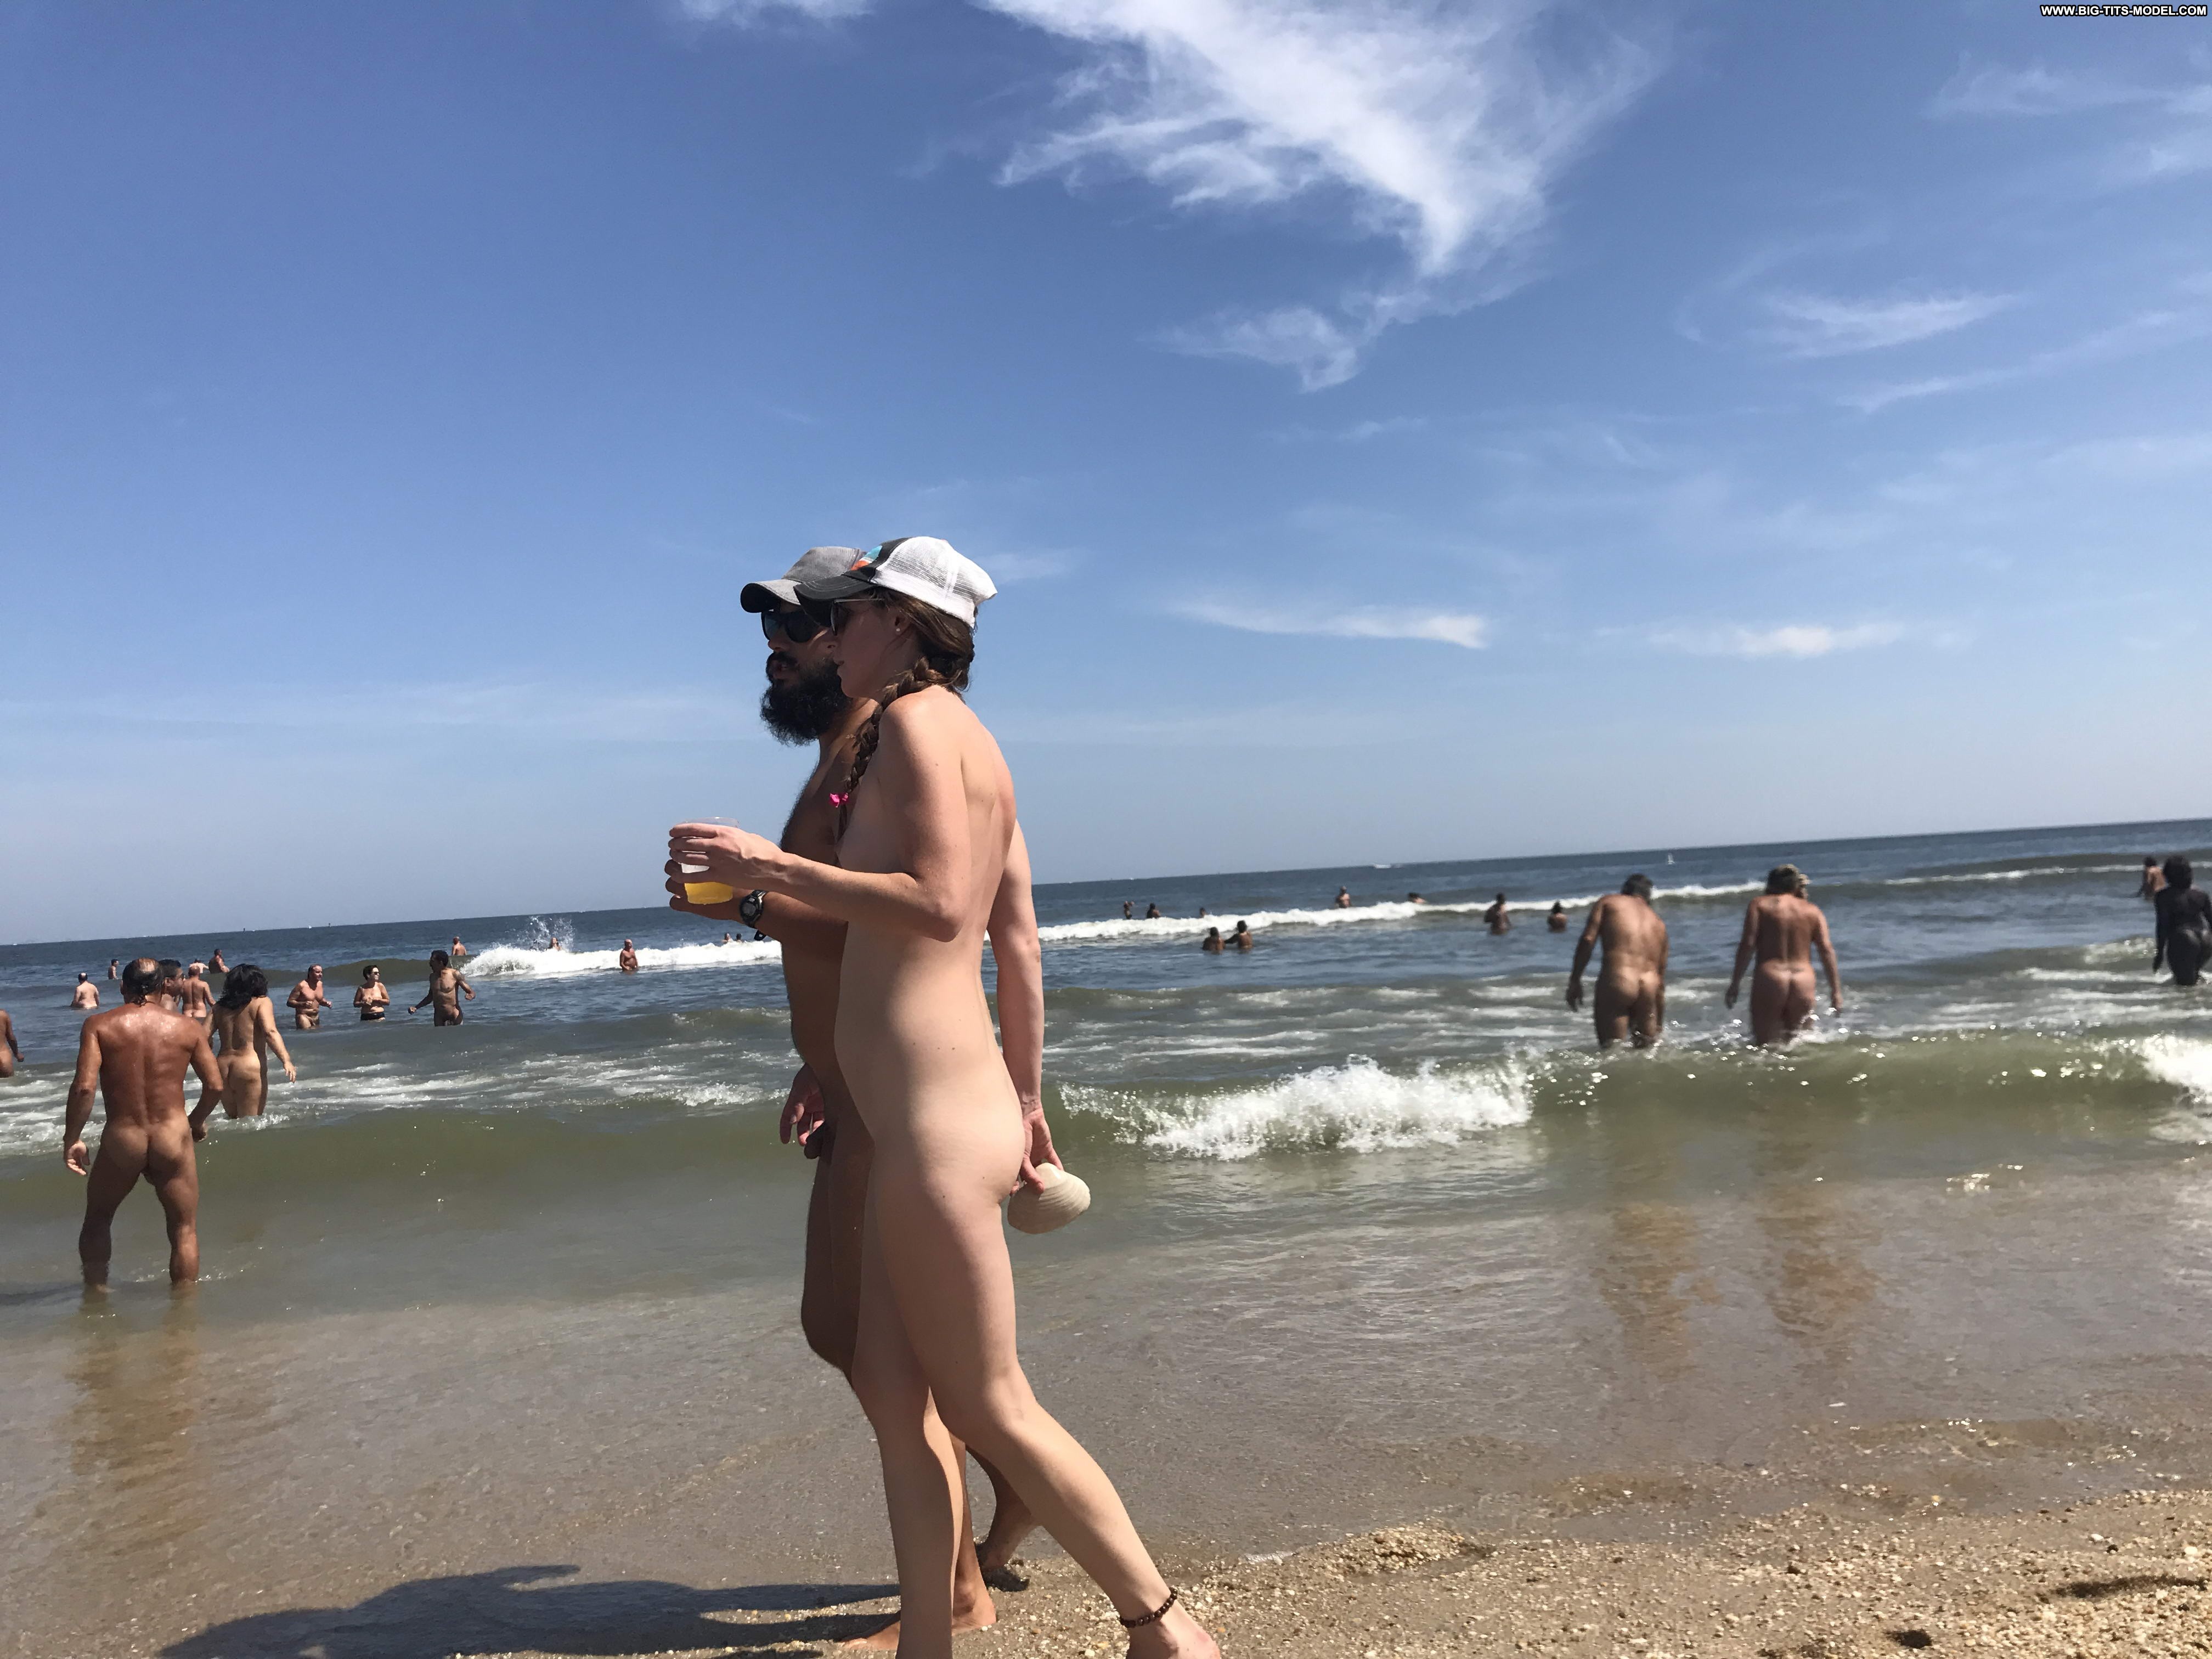 Miriam Naked Girls Caught Tanning Voyeur Nude Ass Beach Unaware picture picture